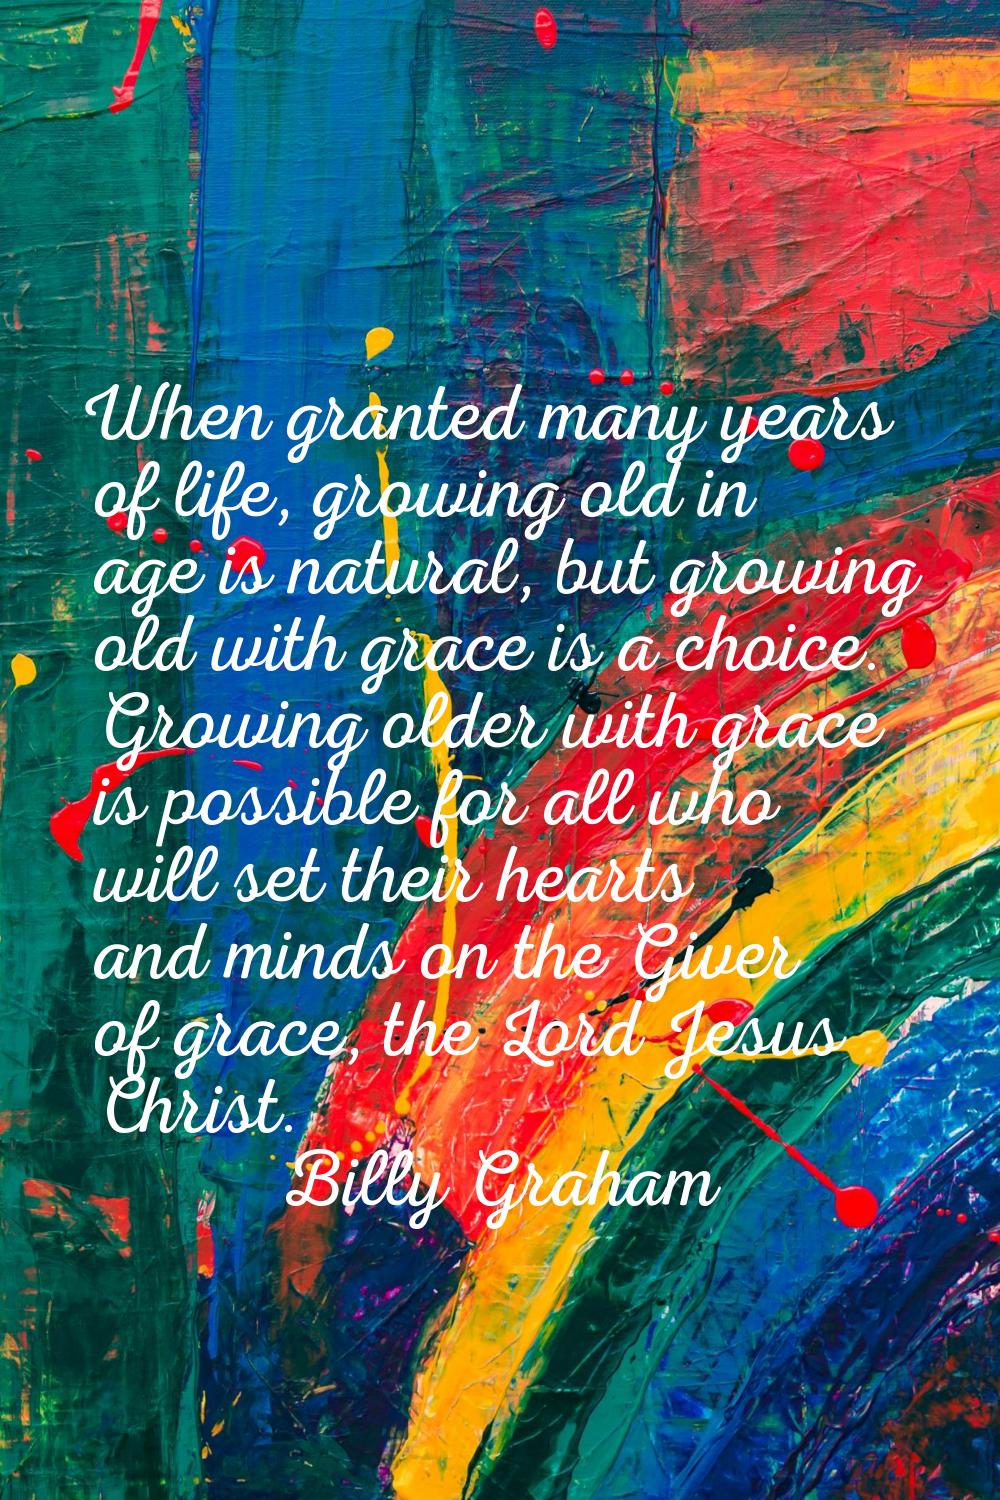 When granted many years of life, growing old in age is natural, but growing old with grace is a cho